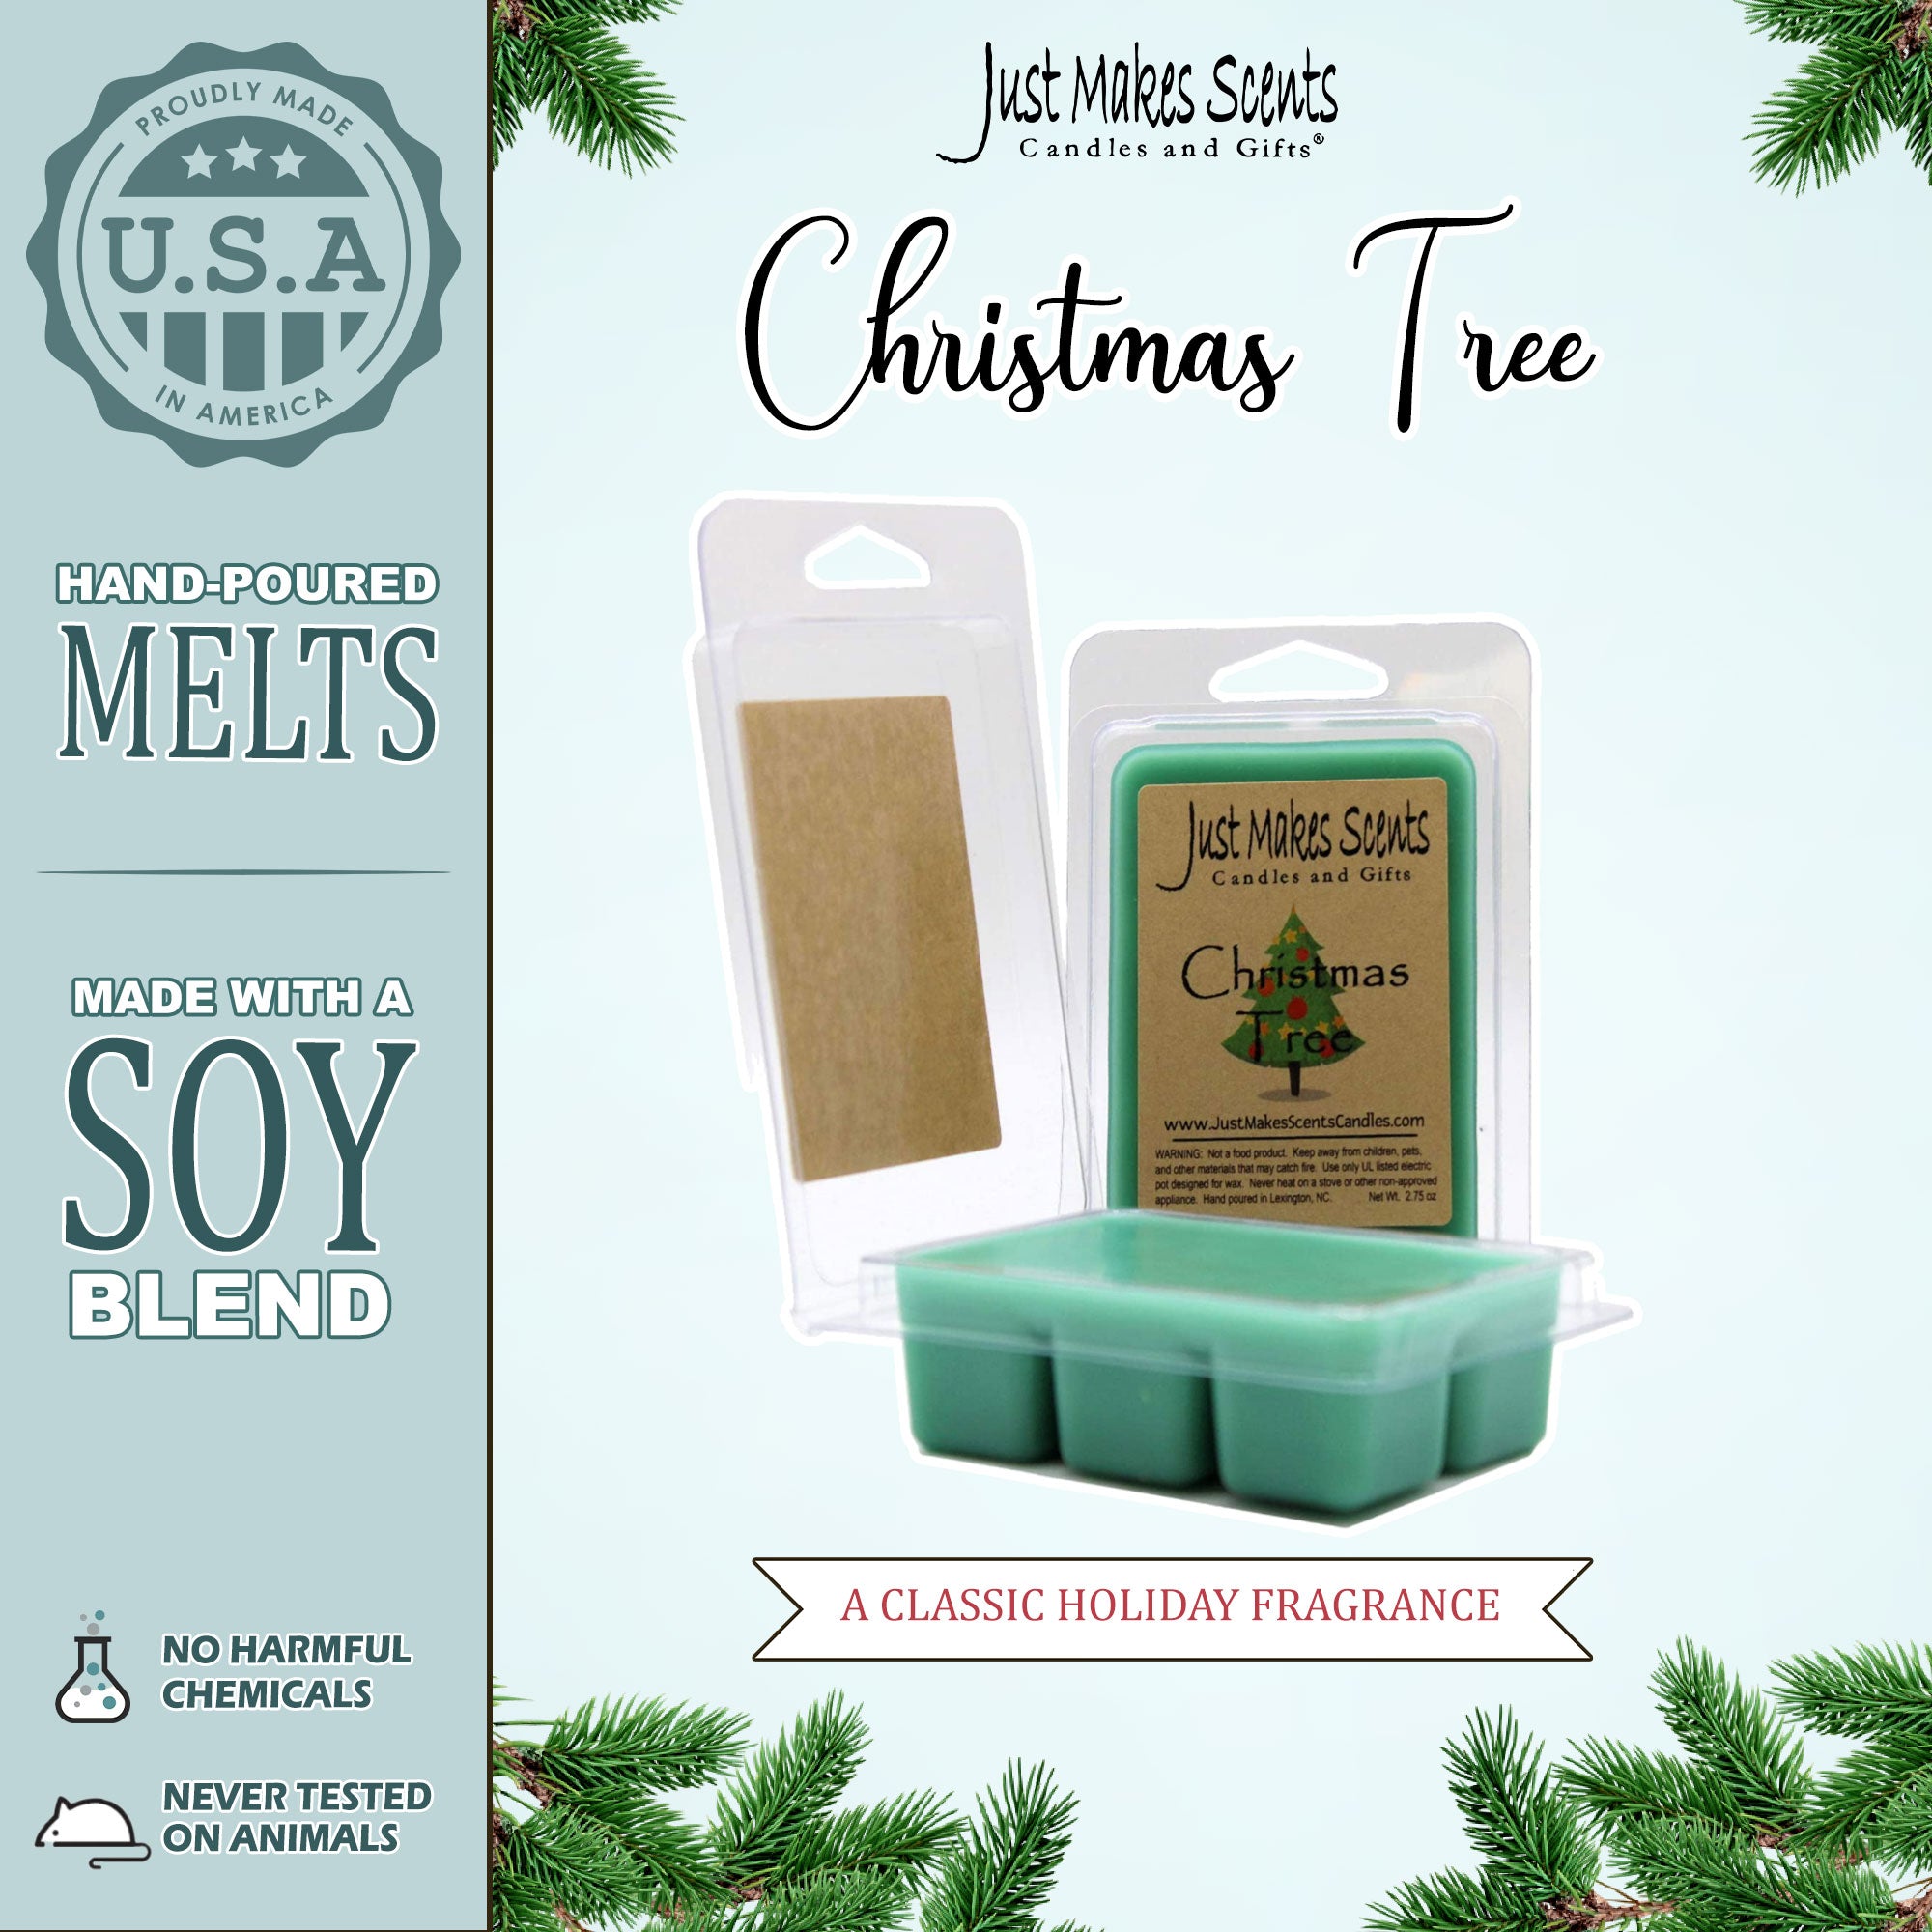 CHRISTMAS STRONG SCENTED Wax Melts Christmas Gift Gift Ideas Holiday Gifts  Christmas Scents Autumn Wax Melts Christmas Wax Melts 